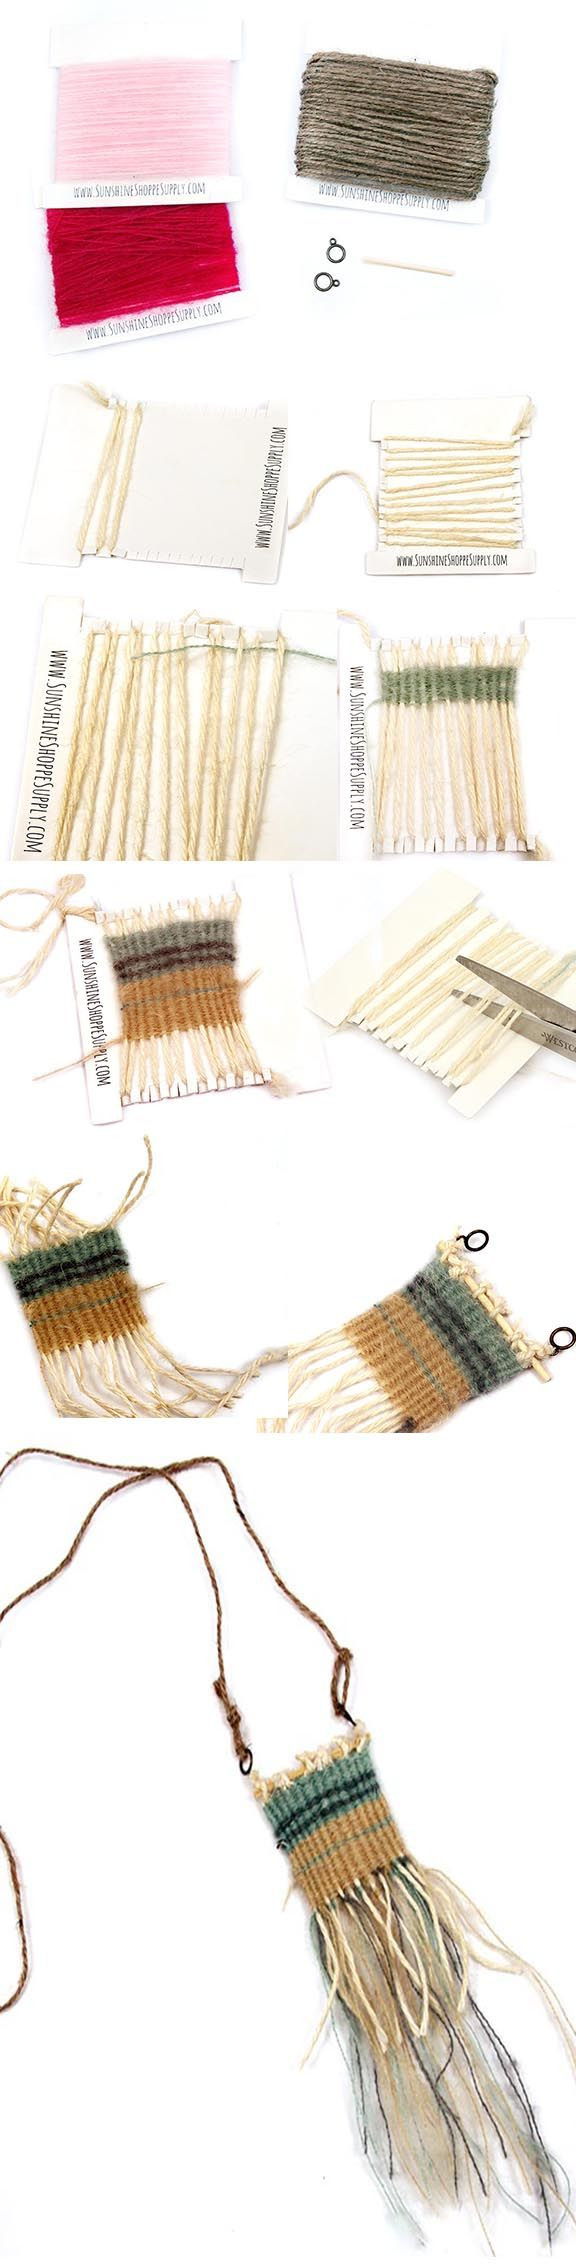 Cardboard Crafts For Adults
 This DIY cardboard weaving loom is the perfect small